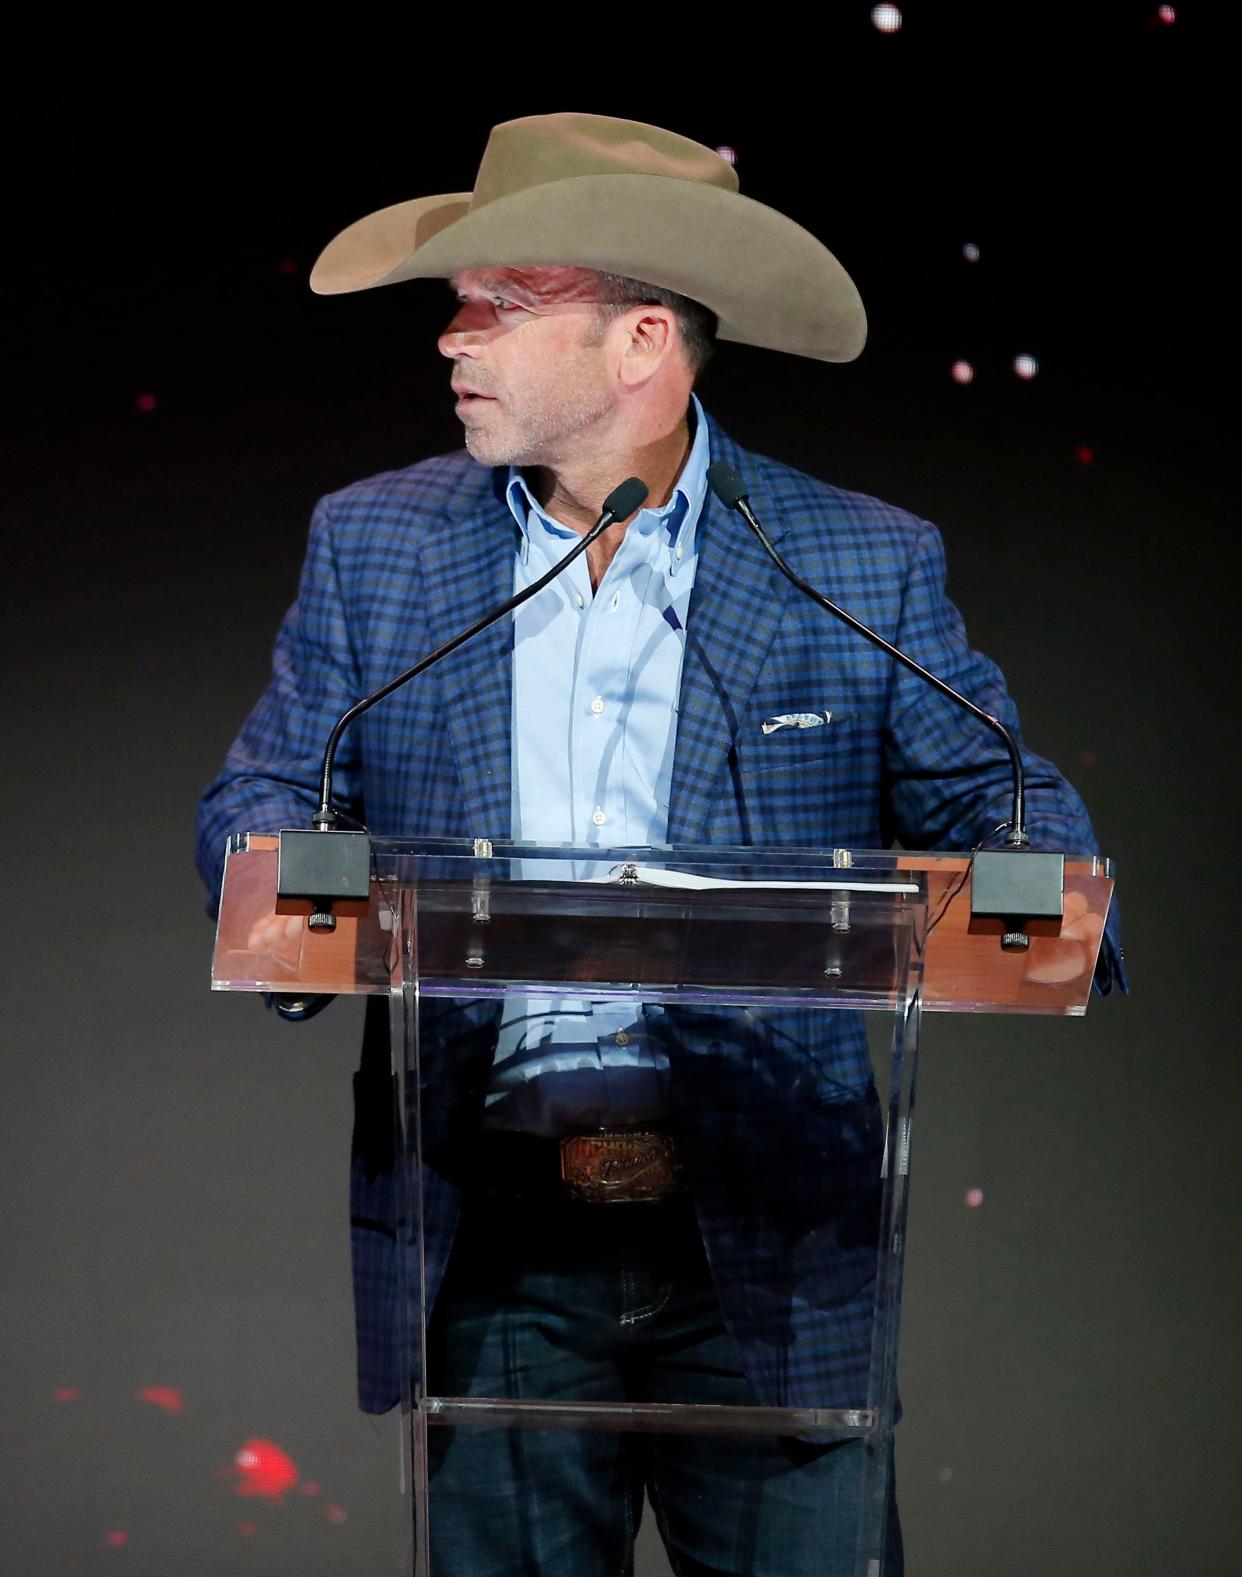 Taylor Sheridan accepts the award for Outstanding Fictional Drama Presentation for "1883" Season 1, Episode 1 during the April, 9, 2022, Western Heritage Awards at the National Cowboy & Western Heritage Museum in Oklahoma City.